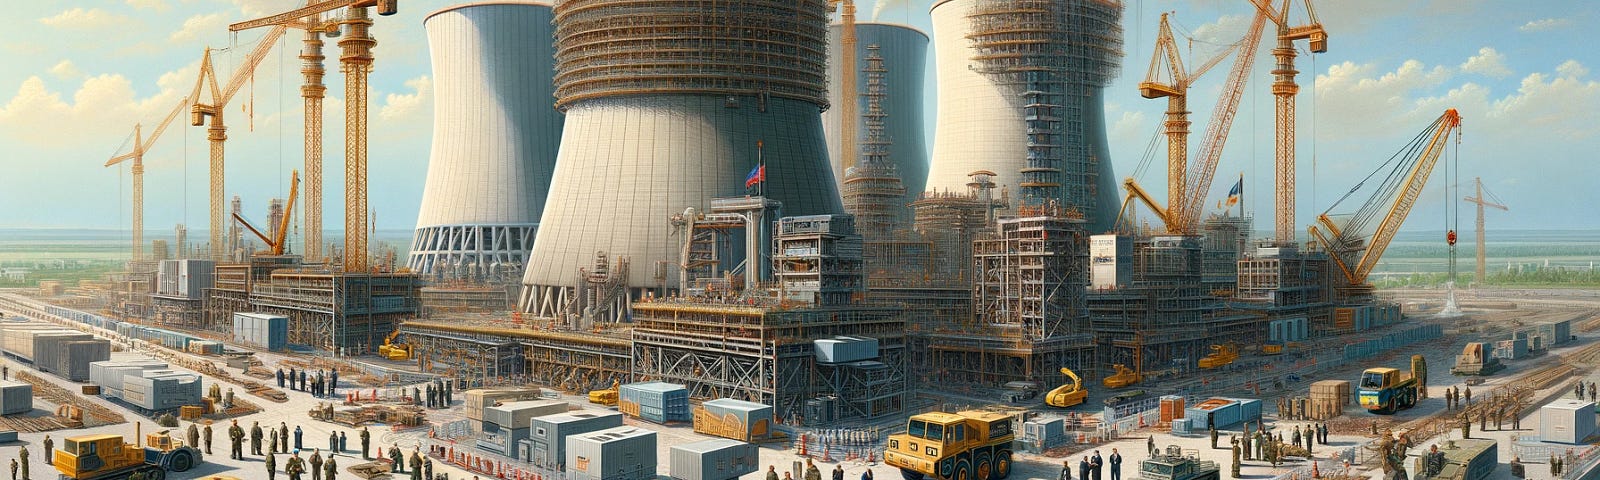 ChatGPT & DALL-E generated panoramic image depicting a nuclear power plant under construction, with government and military personnel actively involved in the building process